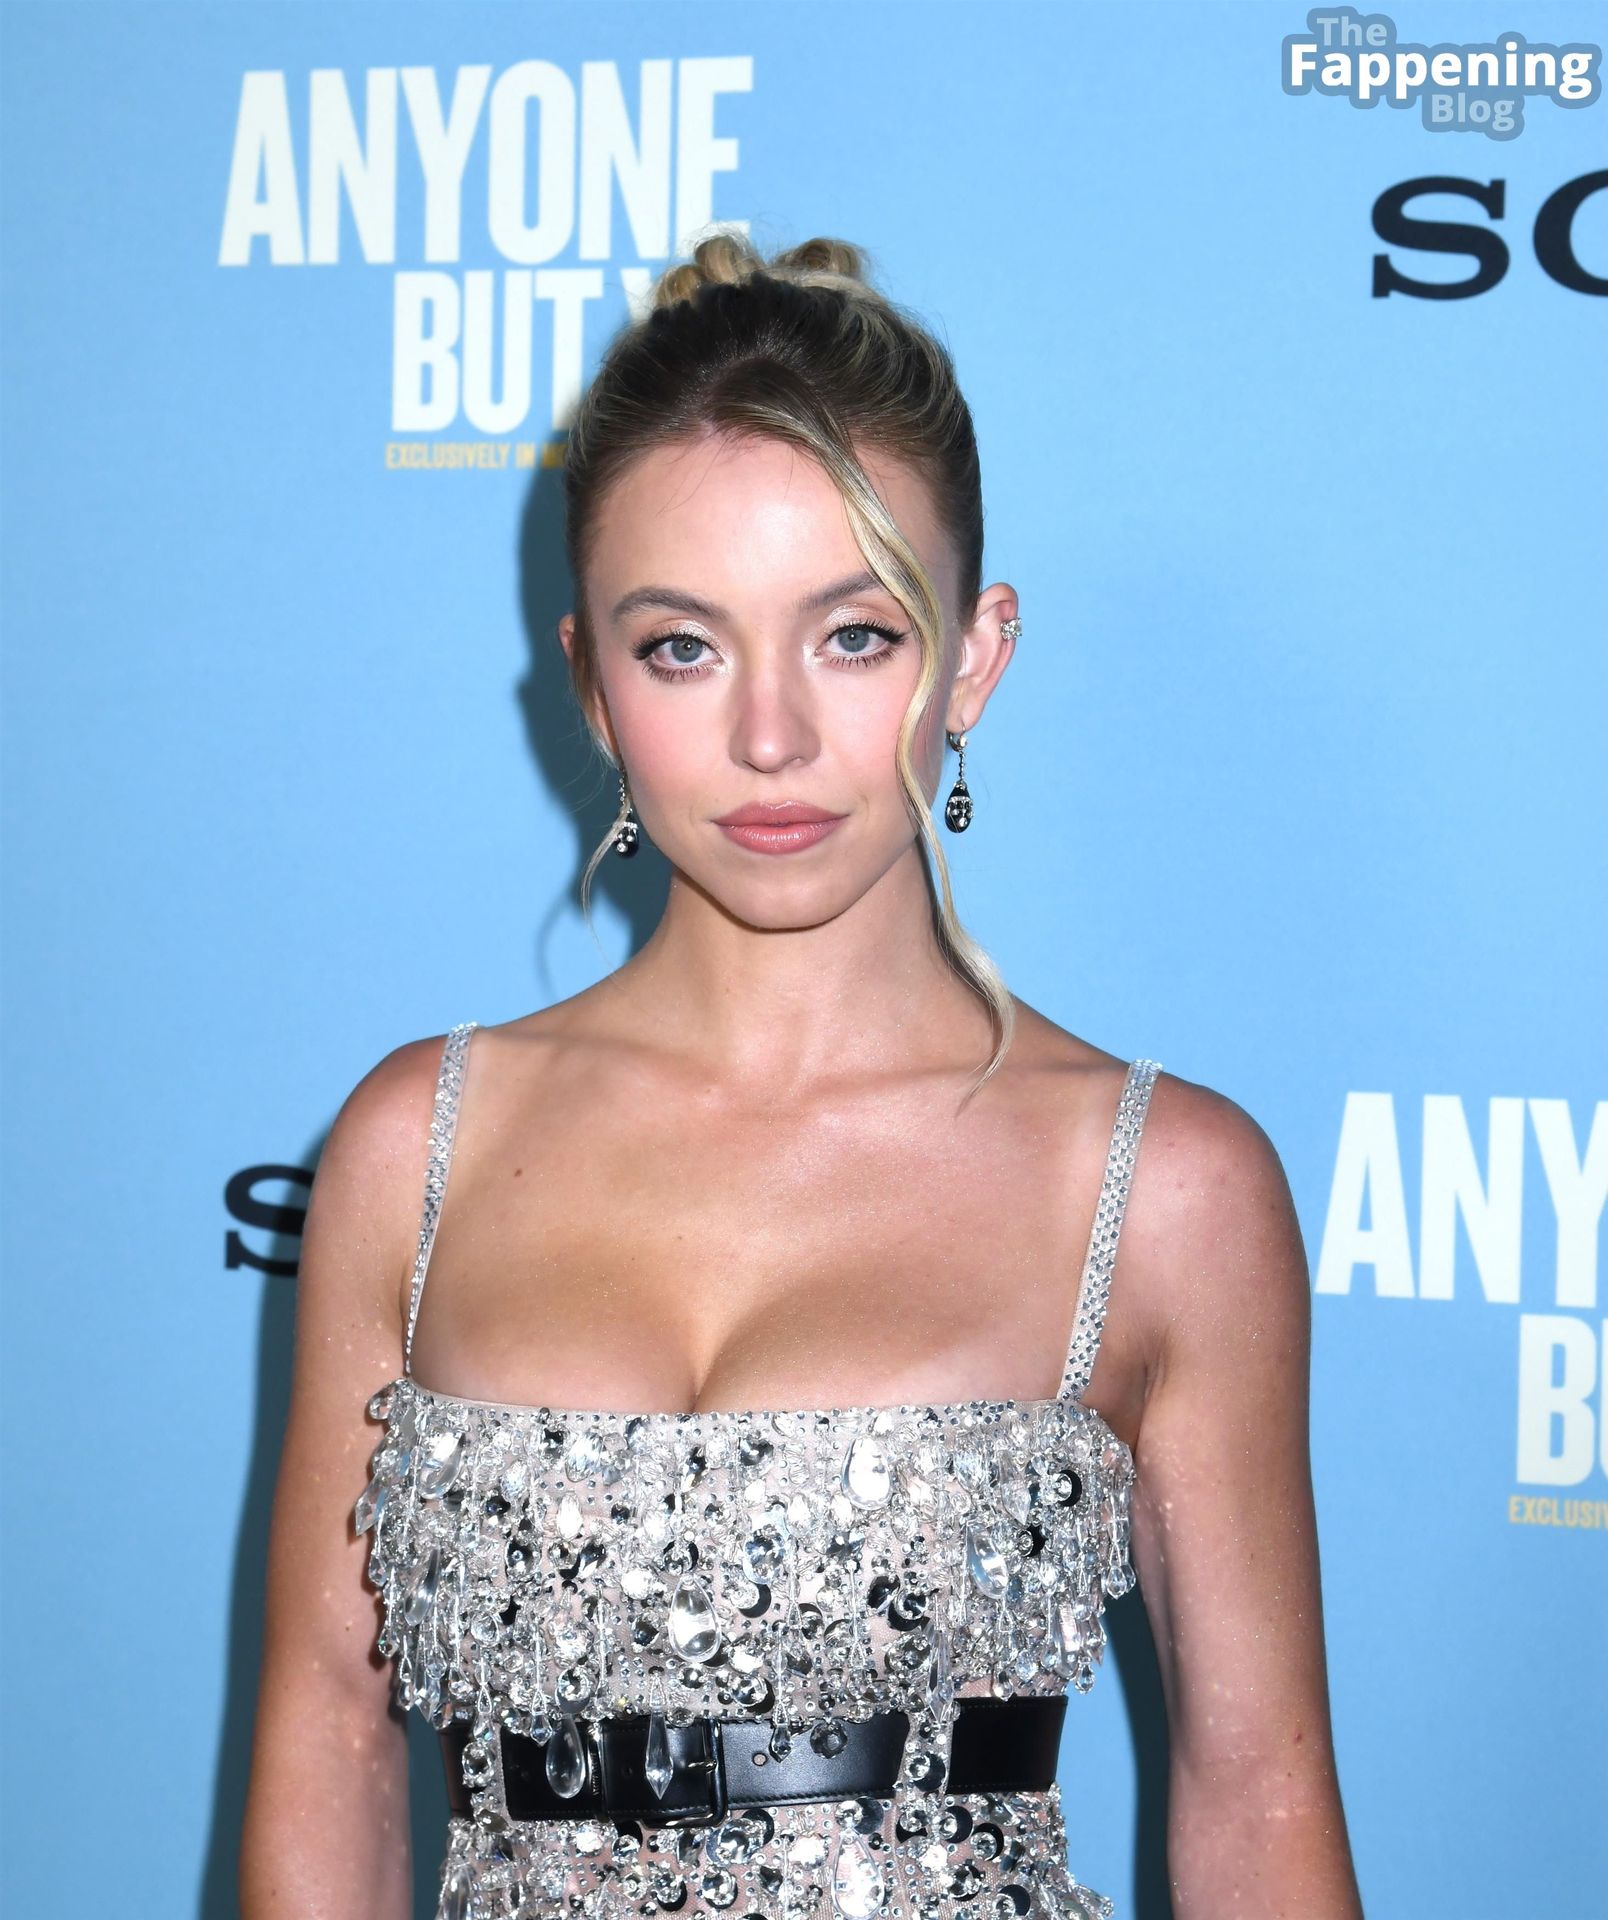 Sydney Sweeney Displays Her Sexy Boobs at the “Anyone But You” Premiere (150 Photos)